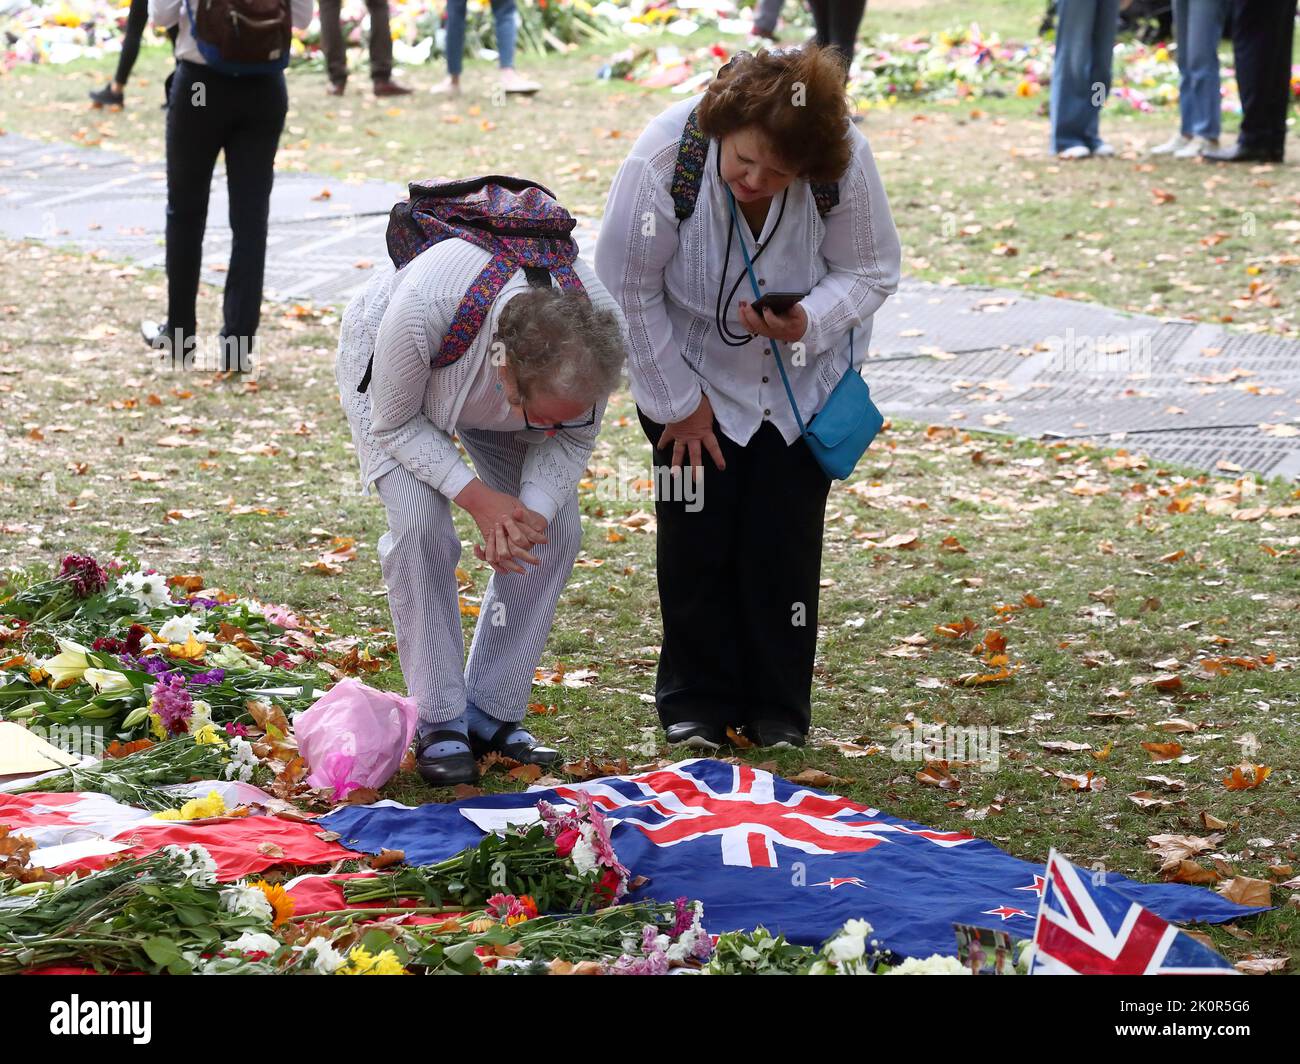 London, UK. 13th Sep, 2022. Thousands of people have left floral tributes, cards and messages for Her Majesty Queen Elizabeth II, who died on September 8th, aged 96. Credit: Uwe Deffner/Alamy Live News Stock Photo